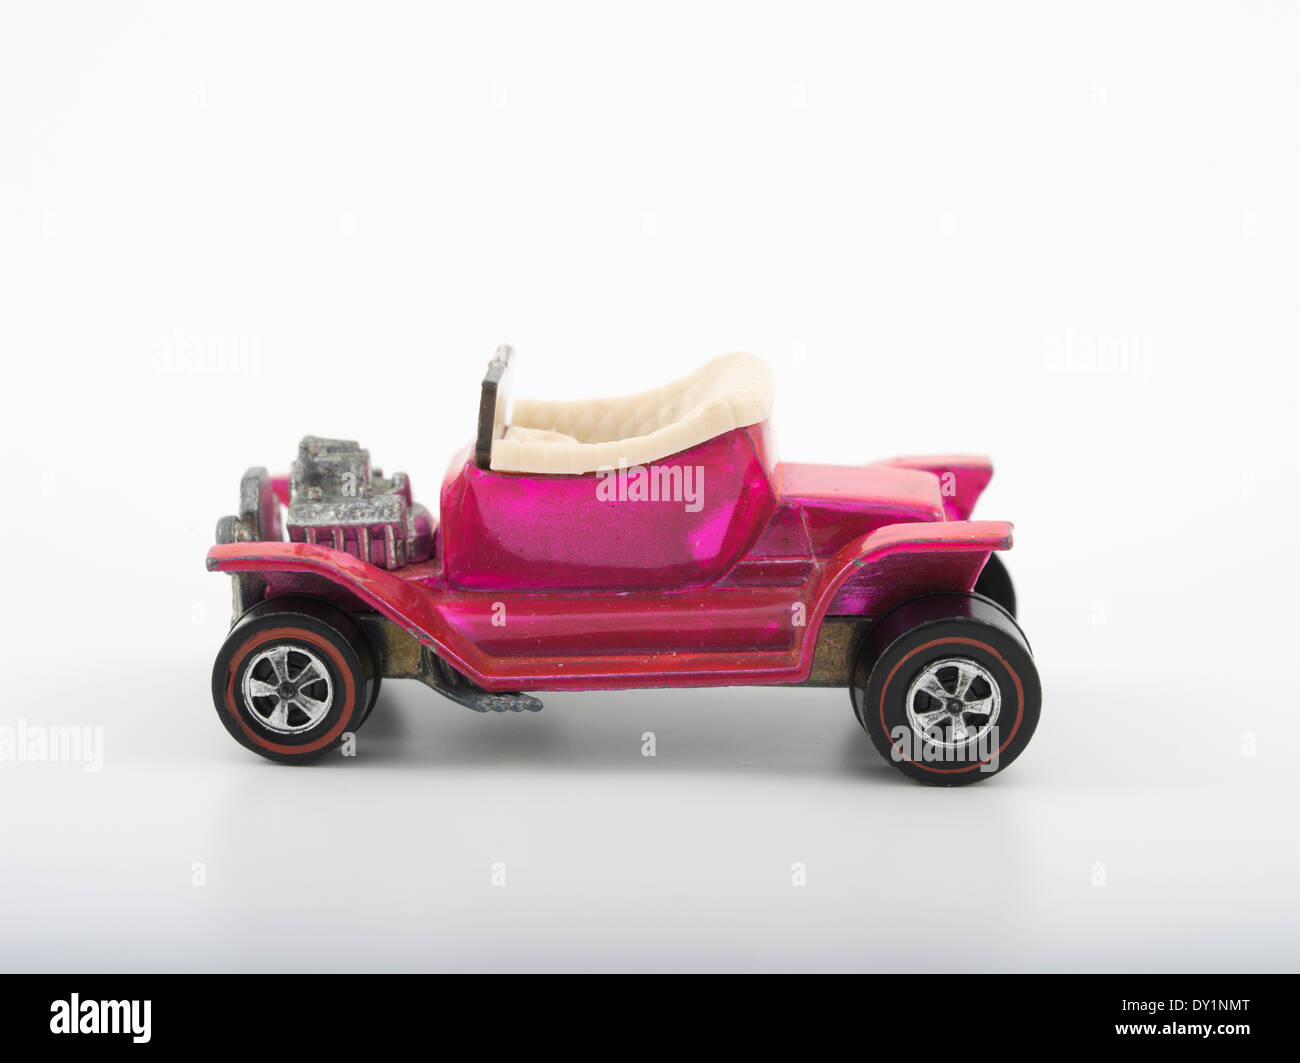 Pink Hot Heap, Hot Wheels die-cast toy cars by Mattel 1968 with Spectraflame paintwork Stock Photo